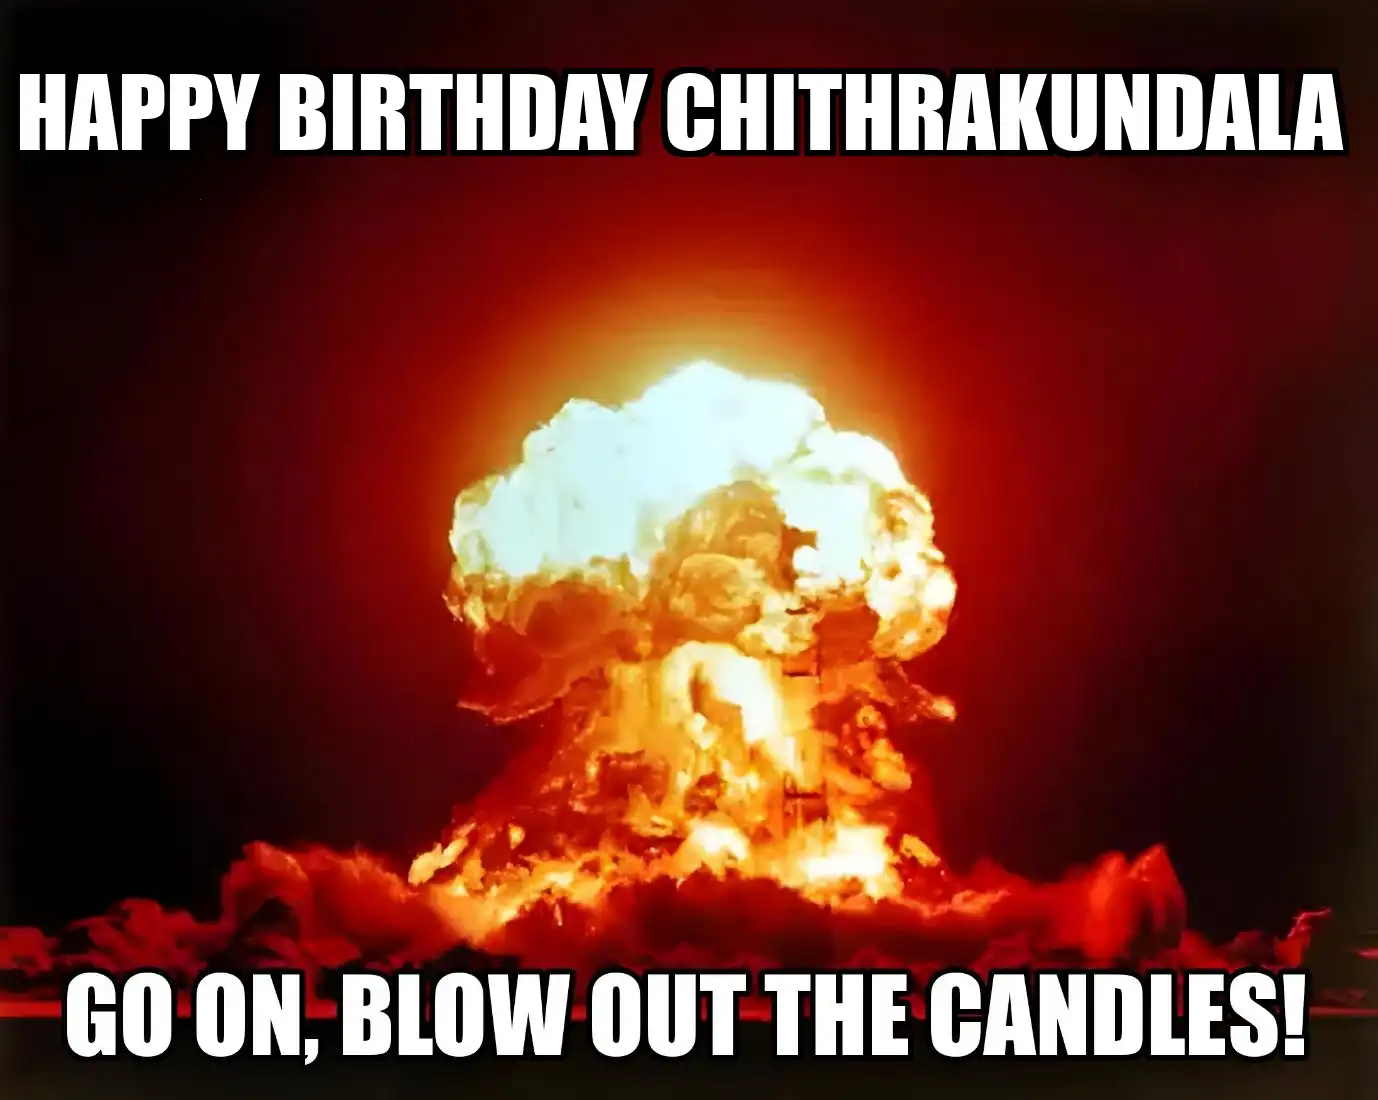 Happy Birthday Chithrakundala Go On Blow Out The Candles Meme